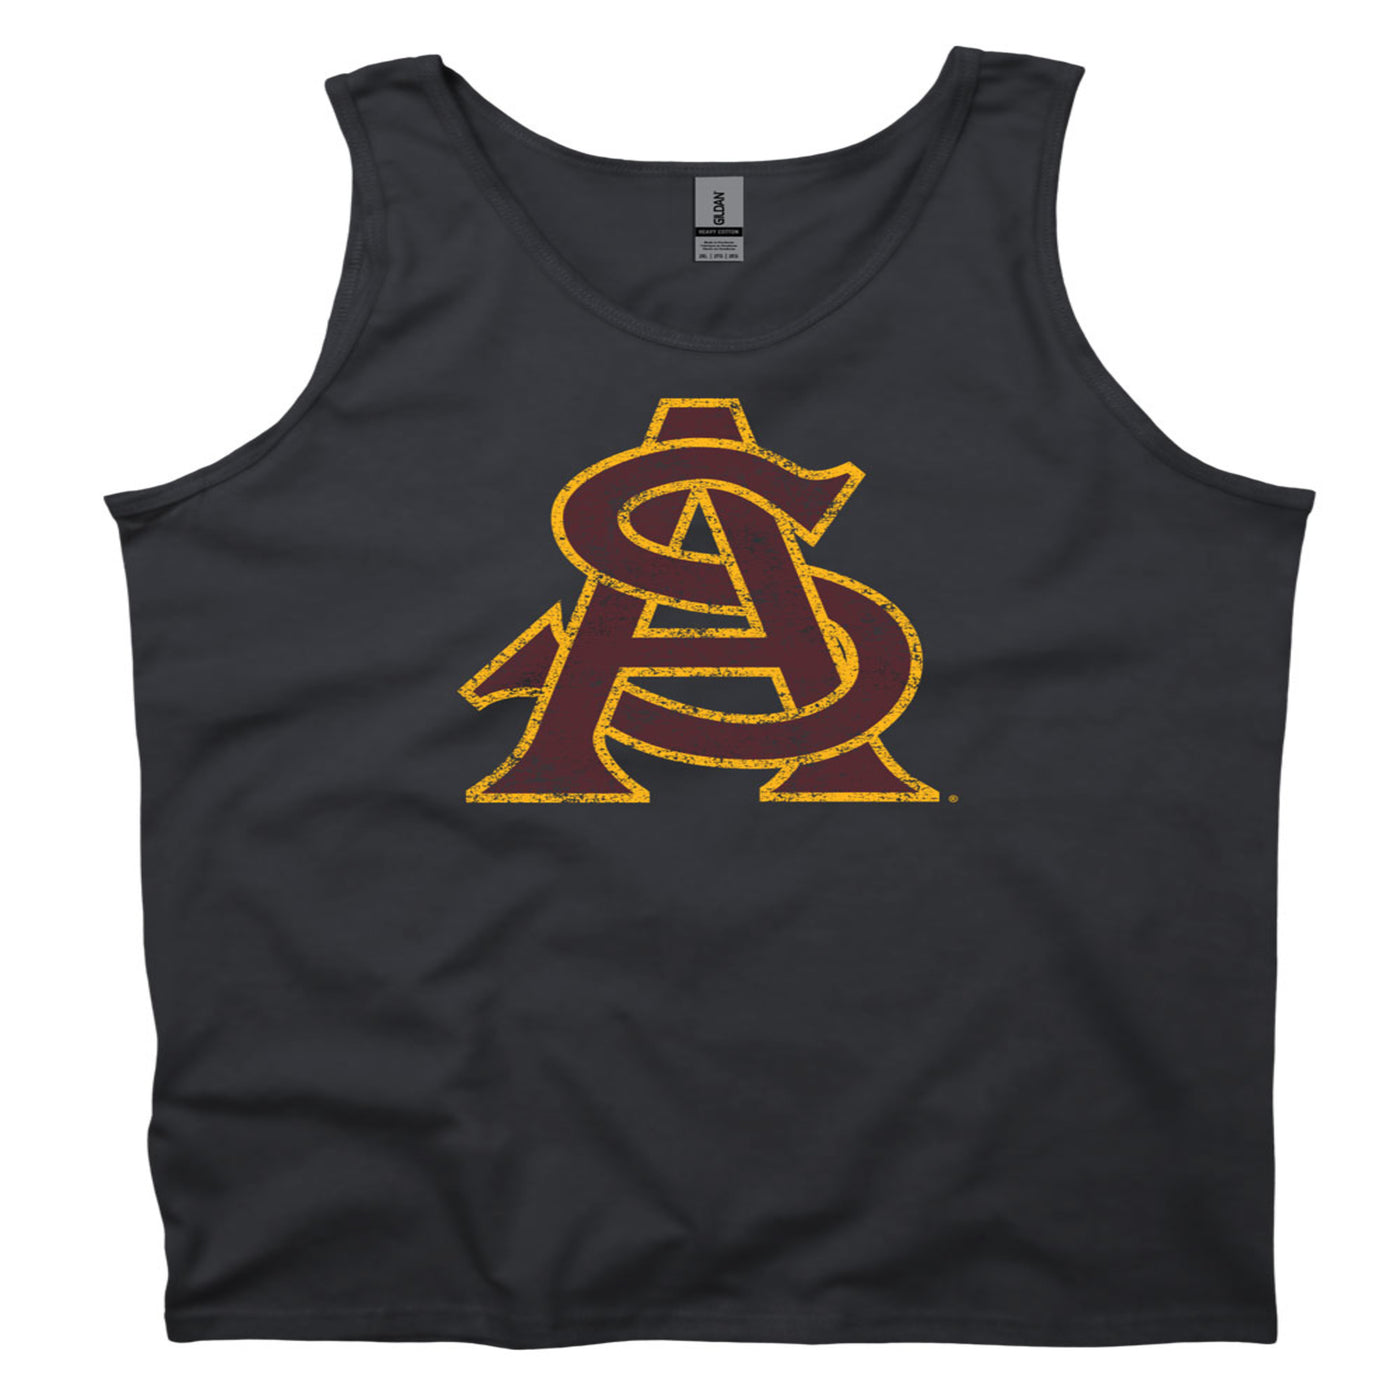 ASU black tank with interlocking A&S logo in maroon with gold outline.